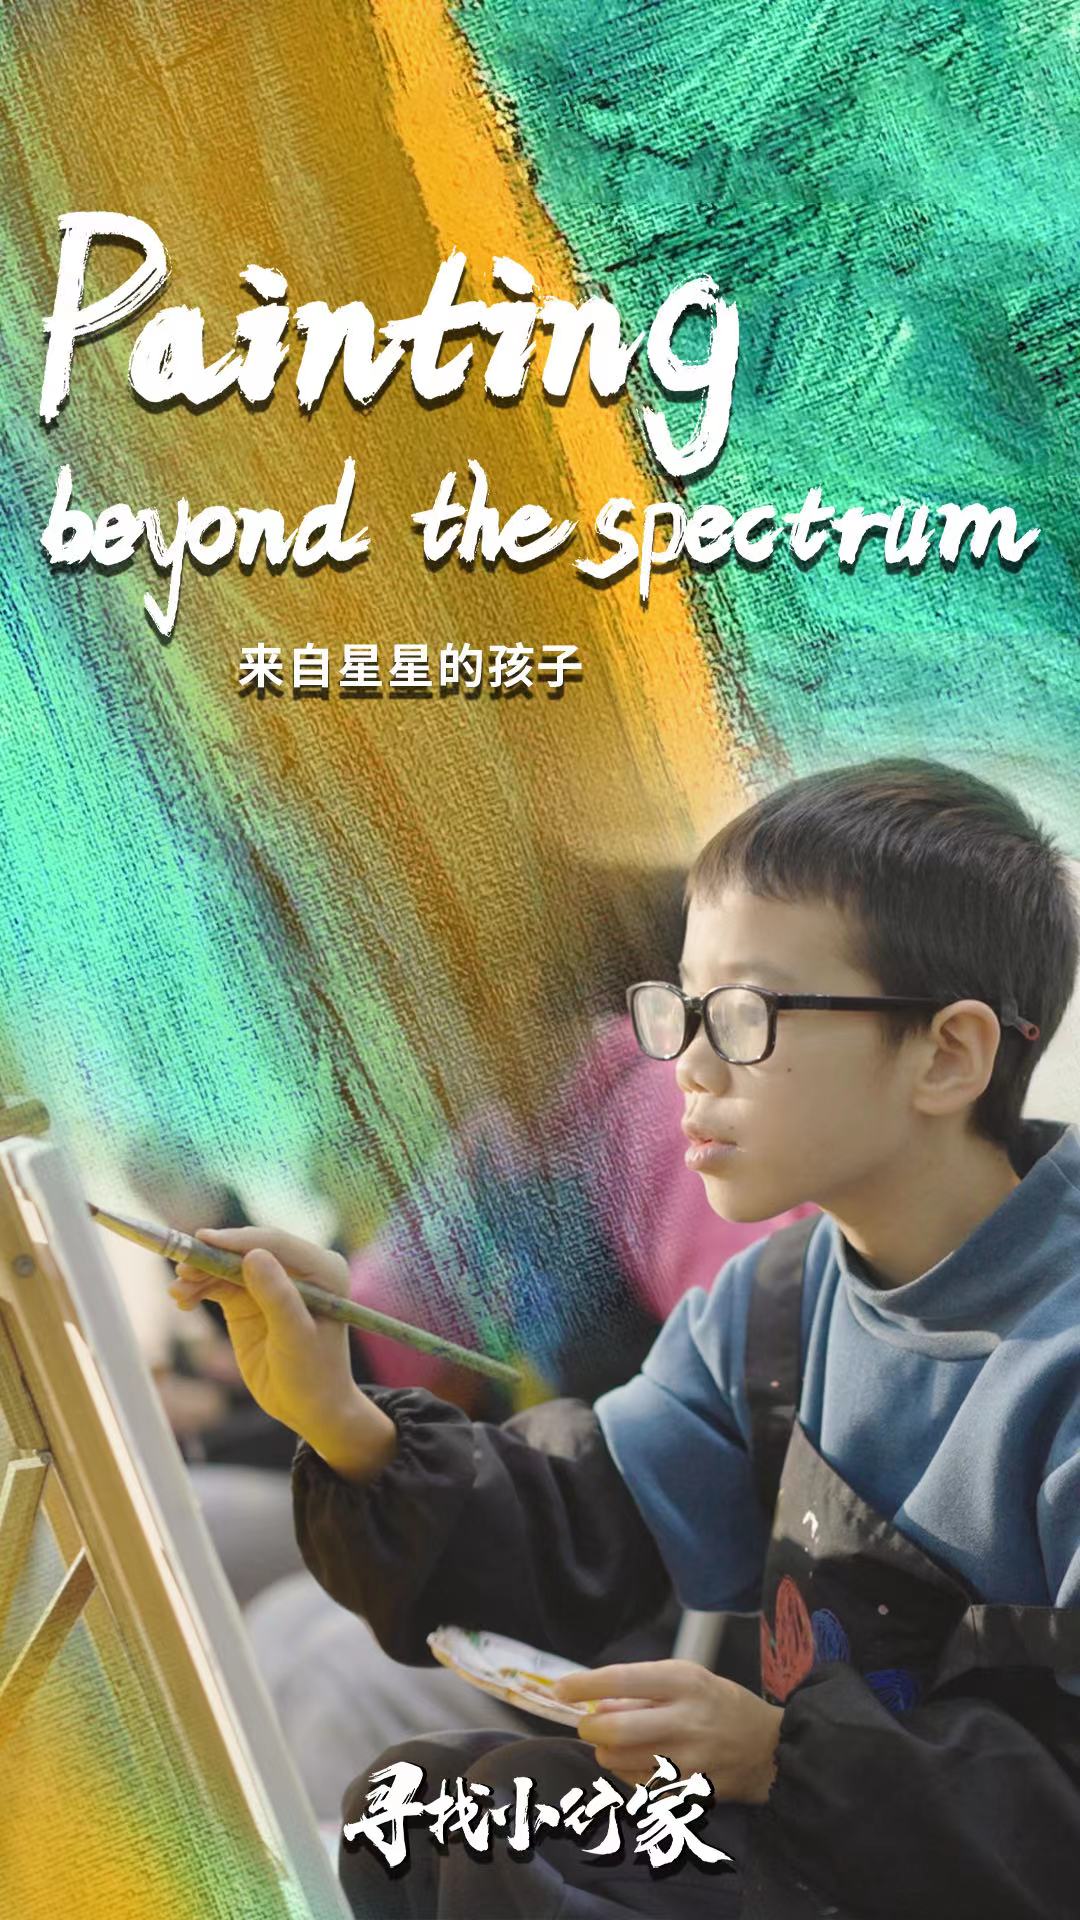 Painting beyond the spectrum